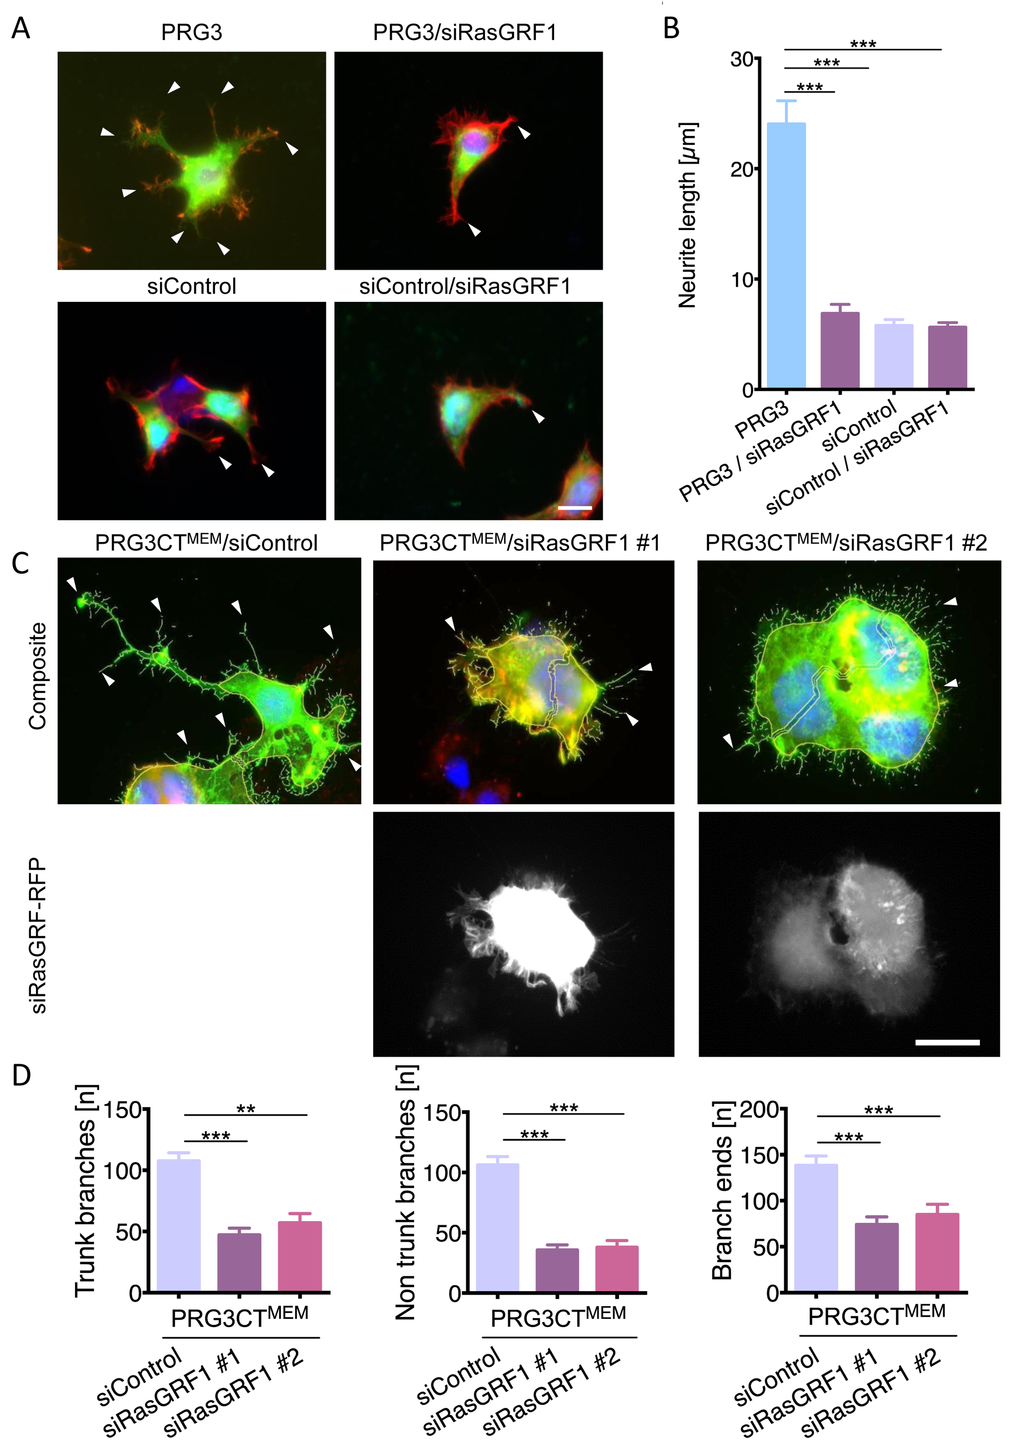 RasGRF1 executes PRG3-induced neuronal sprouting and elongation. (A) Representative images of siRNA mediated knockdown of RasGRF1 and PRG3. Top panel, PRG3 transfected cells show massive neurite sprouting (arrows, left). siRNA mediated knockdown of RasGRF1 in PRG3 overexpressing cells (PRG3/siRasGRF1) show reduced sprouting and membrane protrusions (arrowheads, right). Bottom panel, siRNA mediated knockdown of RasGRF1 (right) does not affect the morphology of controls (scrambled siRNA-transfected cells, left, arrows). Scale bar gives 20 µm. (B) Quantification of neurite length in neurons overexpressing PRG3 (PRG3), PRG3 overexpressing and silenced RasGRF1 (PRG3/siRasGRF1), control transfected (siControl) and control transfected and RasGRF1 siRNA knockdown (siControl/siRasGRF1). Statistical differences are calculated from three independent experiments tested with one way anova with Bonferroni post hoc analysis for multiple group comparisons. Values are given as mean ± SEM, * p C) Representative images of control shRNA (siControl) and two different RasGRF1 RFP-shRNA knockdown vectors (siRasGRF #1 and siRasGRF #2) in PRG3CTMEM expressing neurons show reduced filopodia formation and neurite outgrowth (arrowheads). Scale bar represents 20 µm. (D) Quantification of neuronal morphology in PRG3CTMEM expressing and siRNA mediated RasGRF1 knockdown cells. Neurons were analysed for number of branches at the soma (trunk branches), peripheral branches (non-trunk branches), and tip structures (branch ends). Differences were considered statistically significant with * p